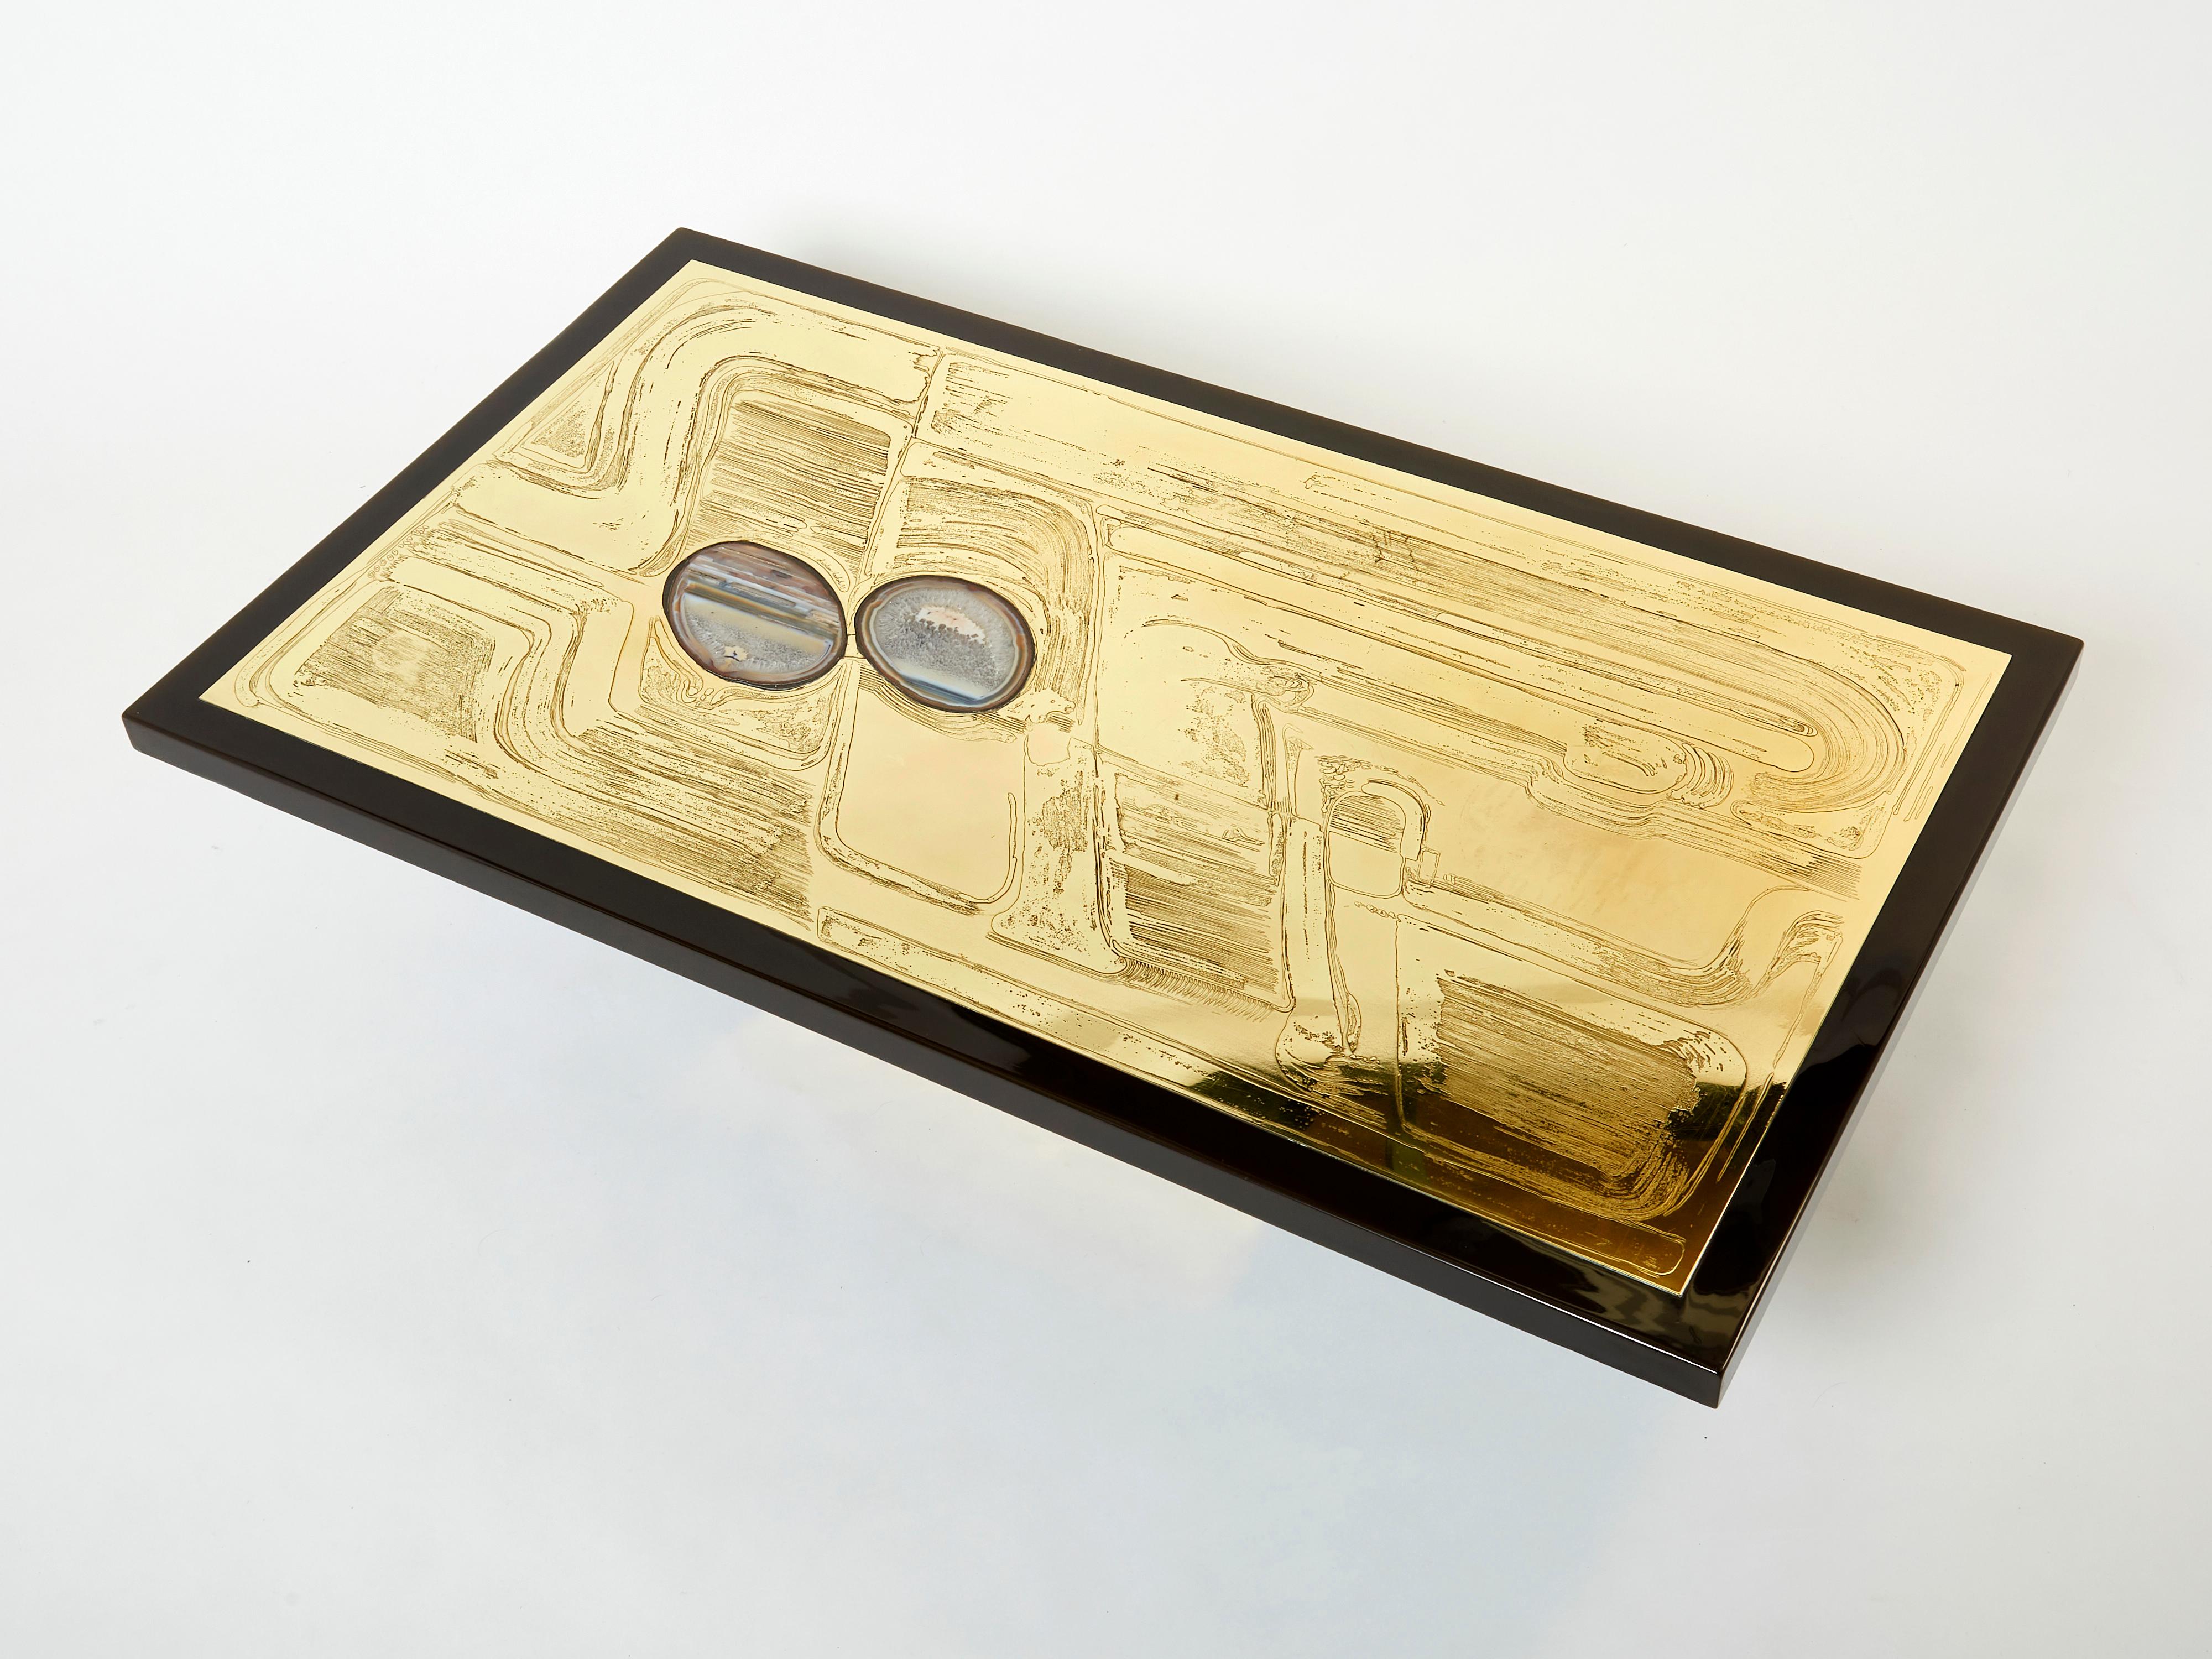 Christian Krekels Signed Belgian Etched Brass Agate Coffee Table, 1979 For Sale 1